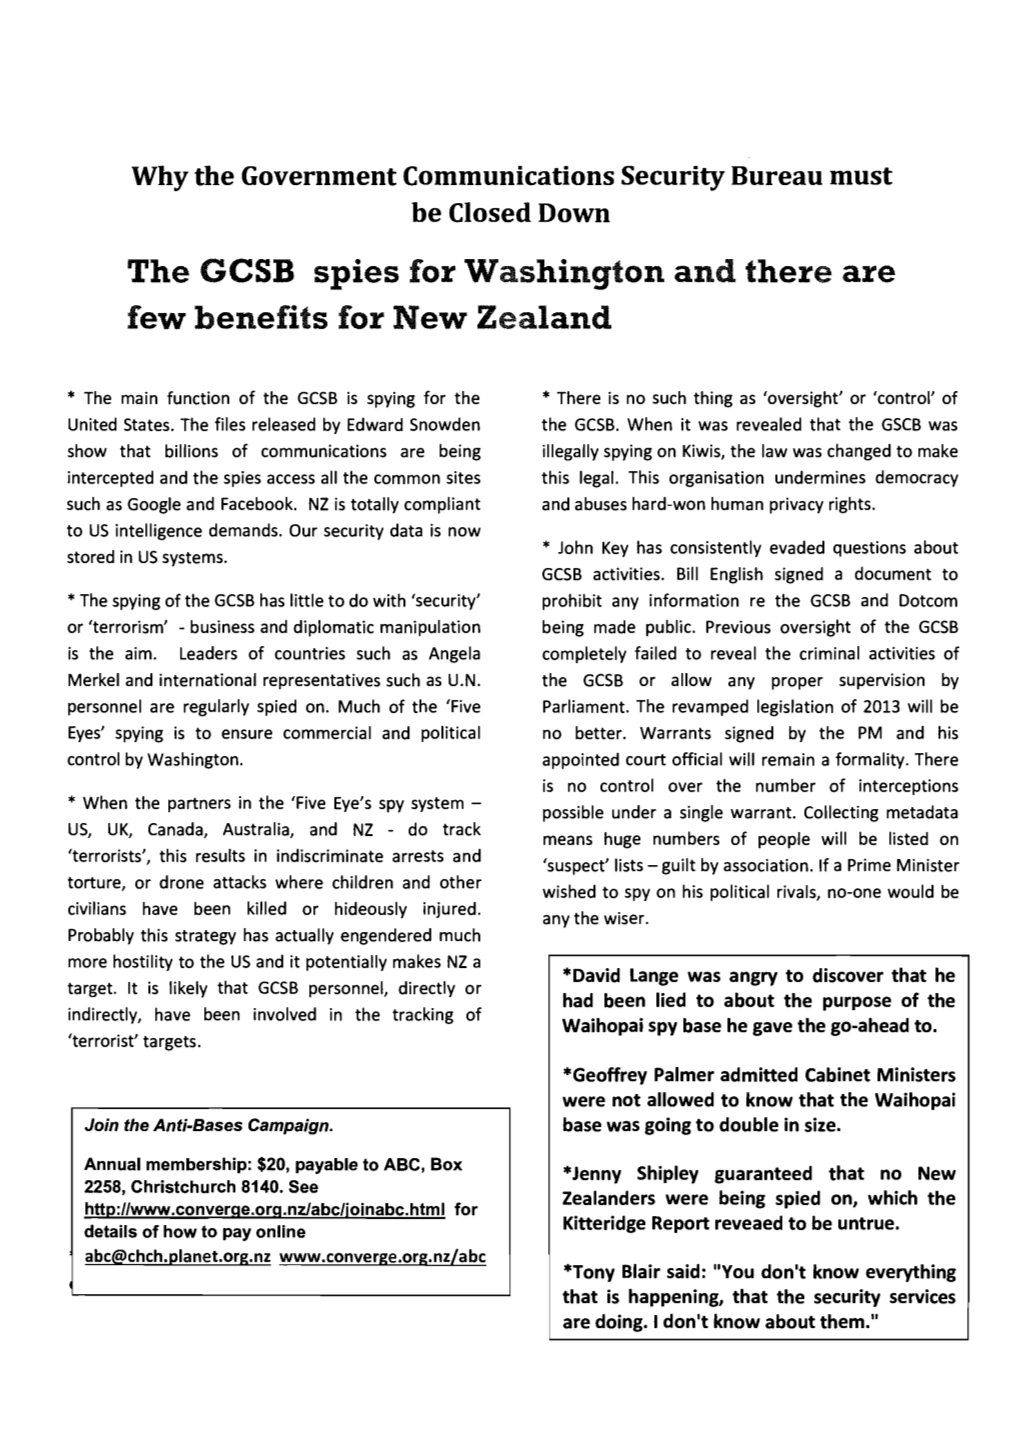 The GCSB Spies for Washington and There Are Few Benefits for New Zealand